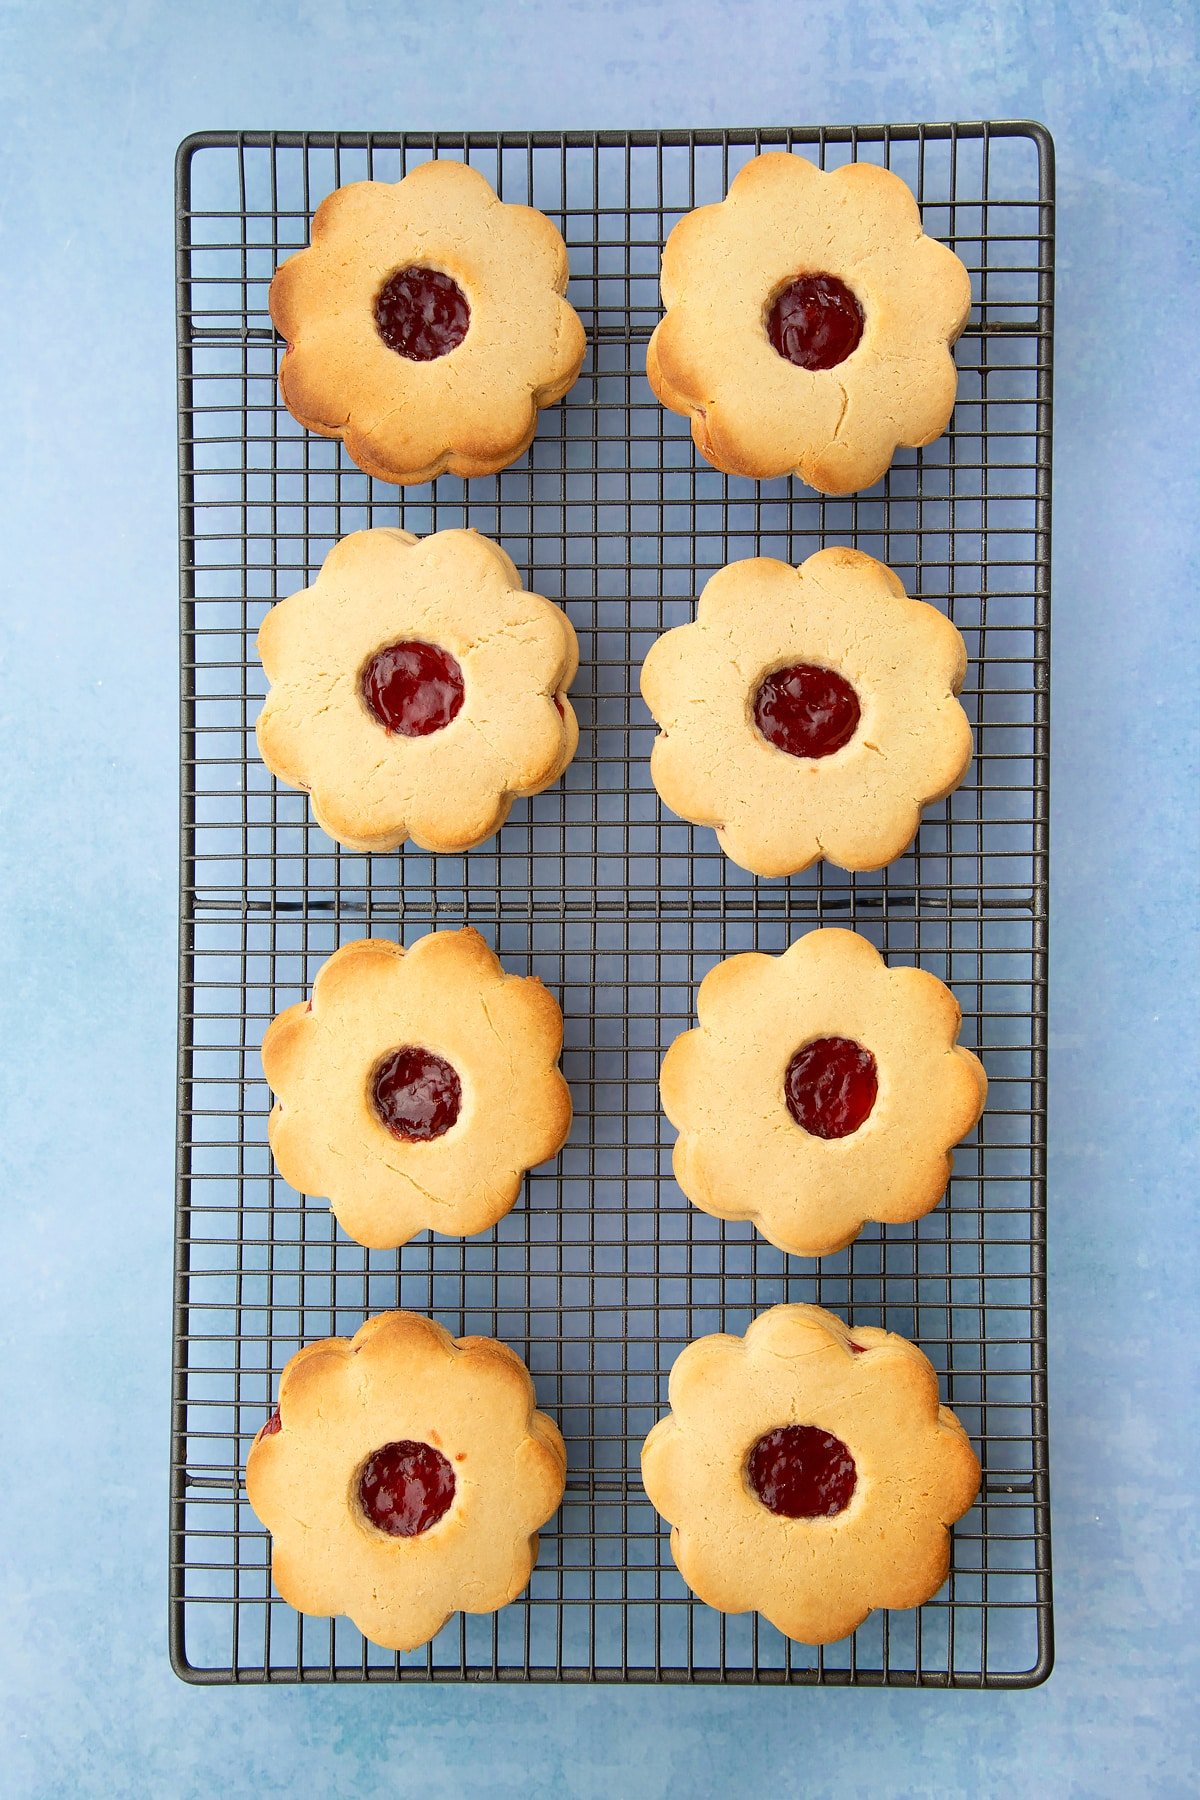 Giant jammie dodgers cooling on a wire rack. 